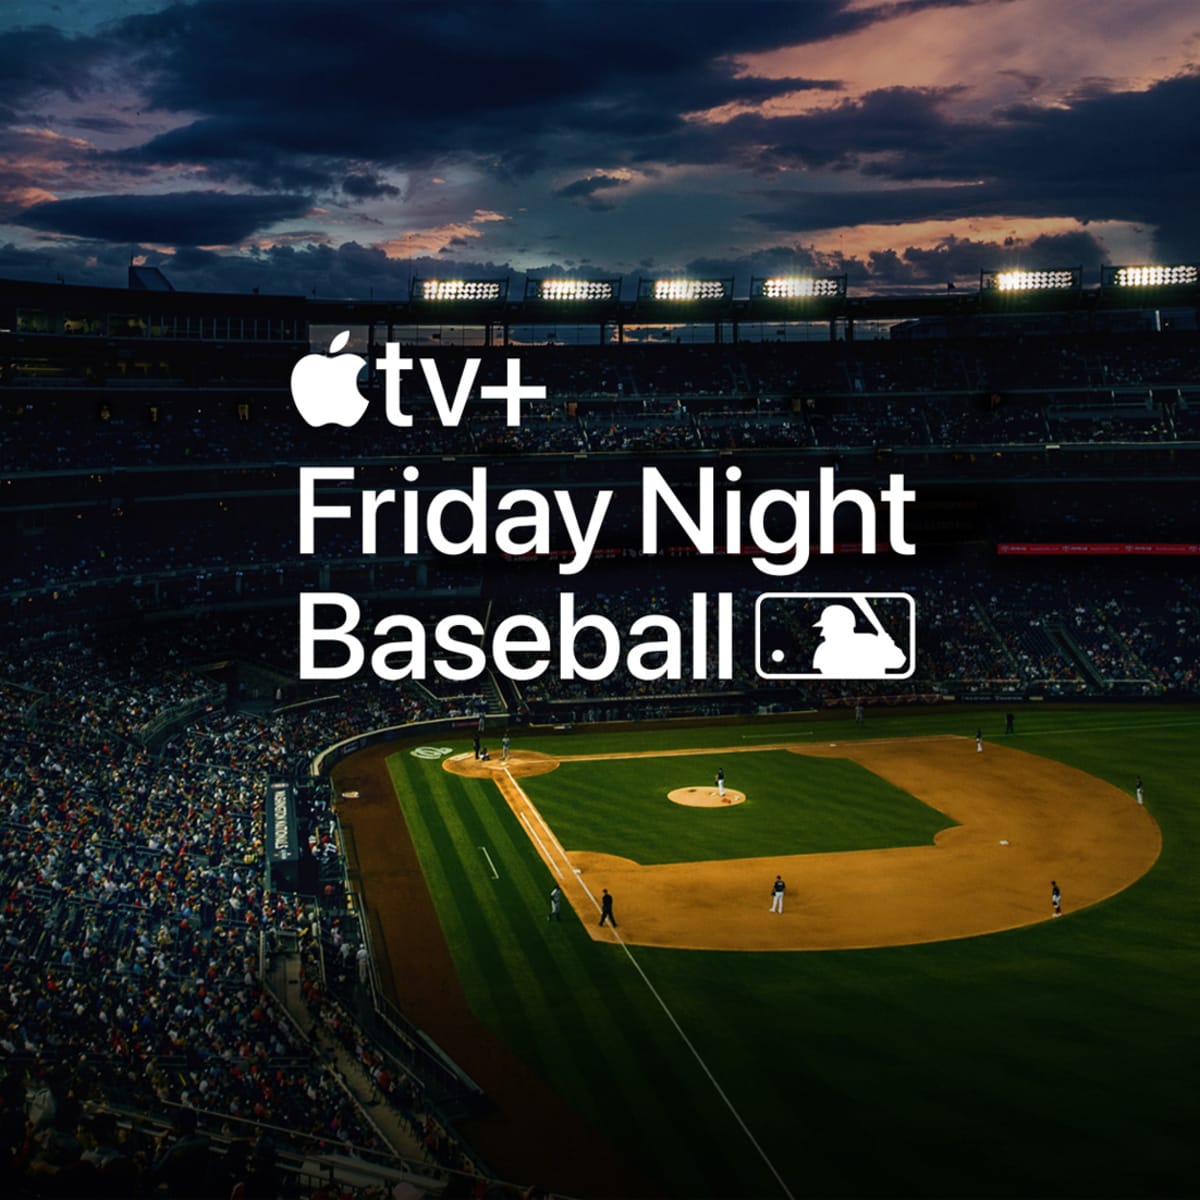 MLB, Apple Announce TV Streaming Deal For Exclusive Friday Night